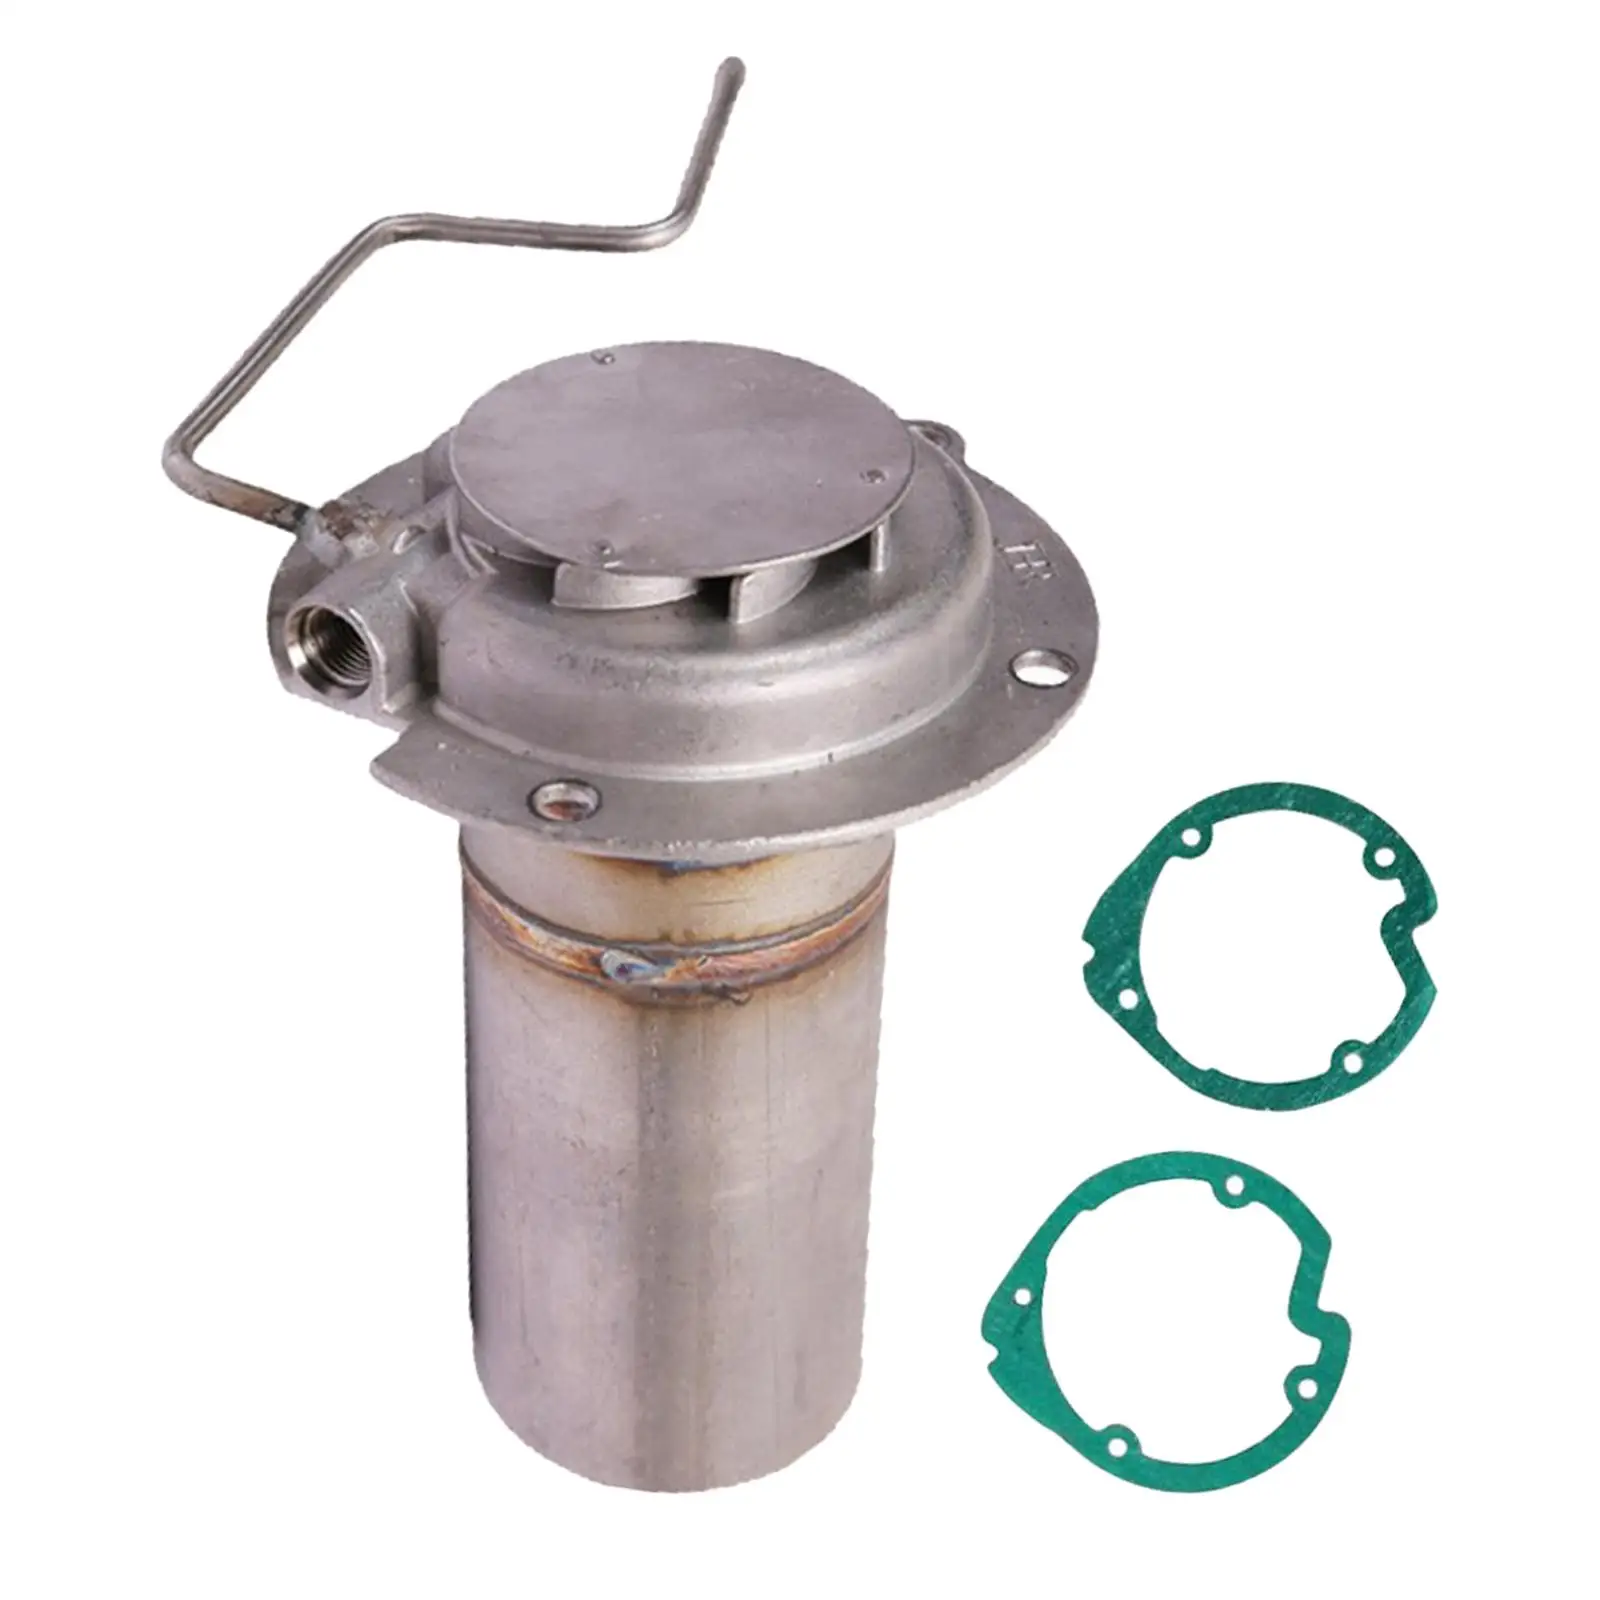 Automotive Combustion Chamber for Parking Heater Easily Install Quiet